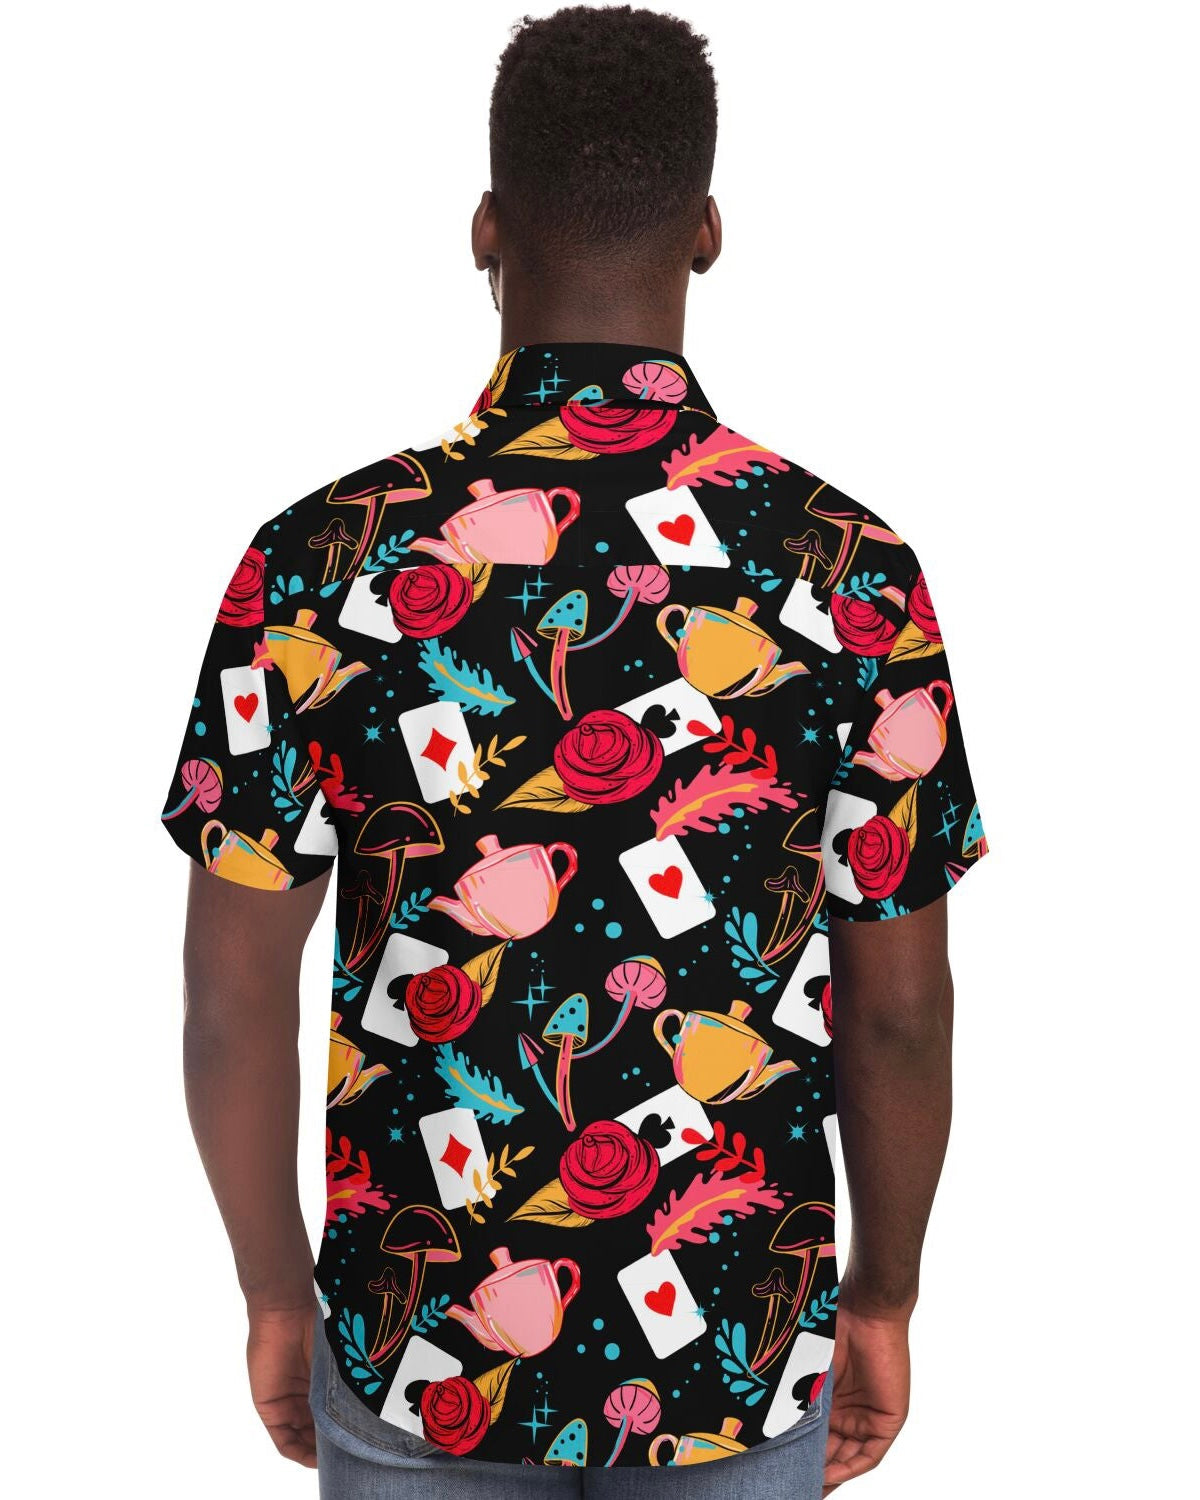 Curiouser and Curiouser Party Shirt, Short Sleeve Button Down Shirt, - One Stop Rave